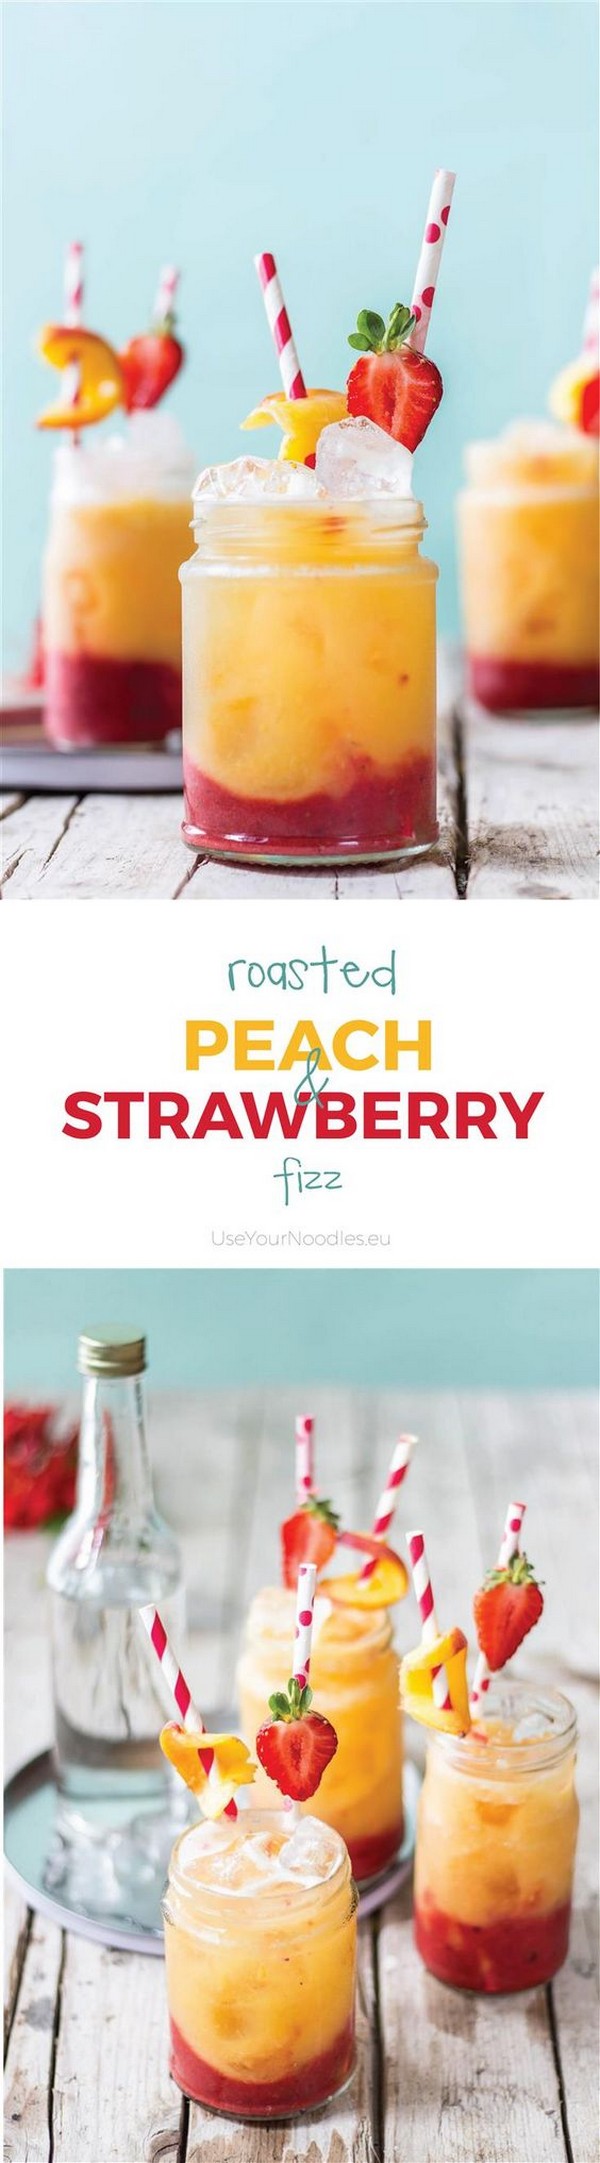 Roasted Peach And Strawberry Fizz